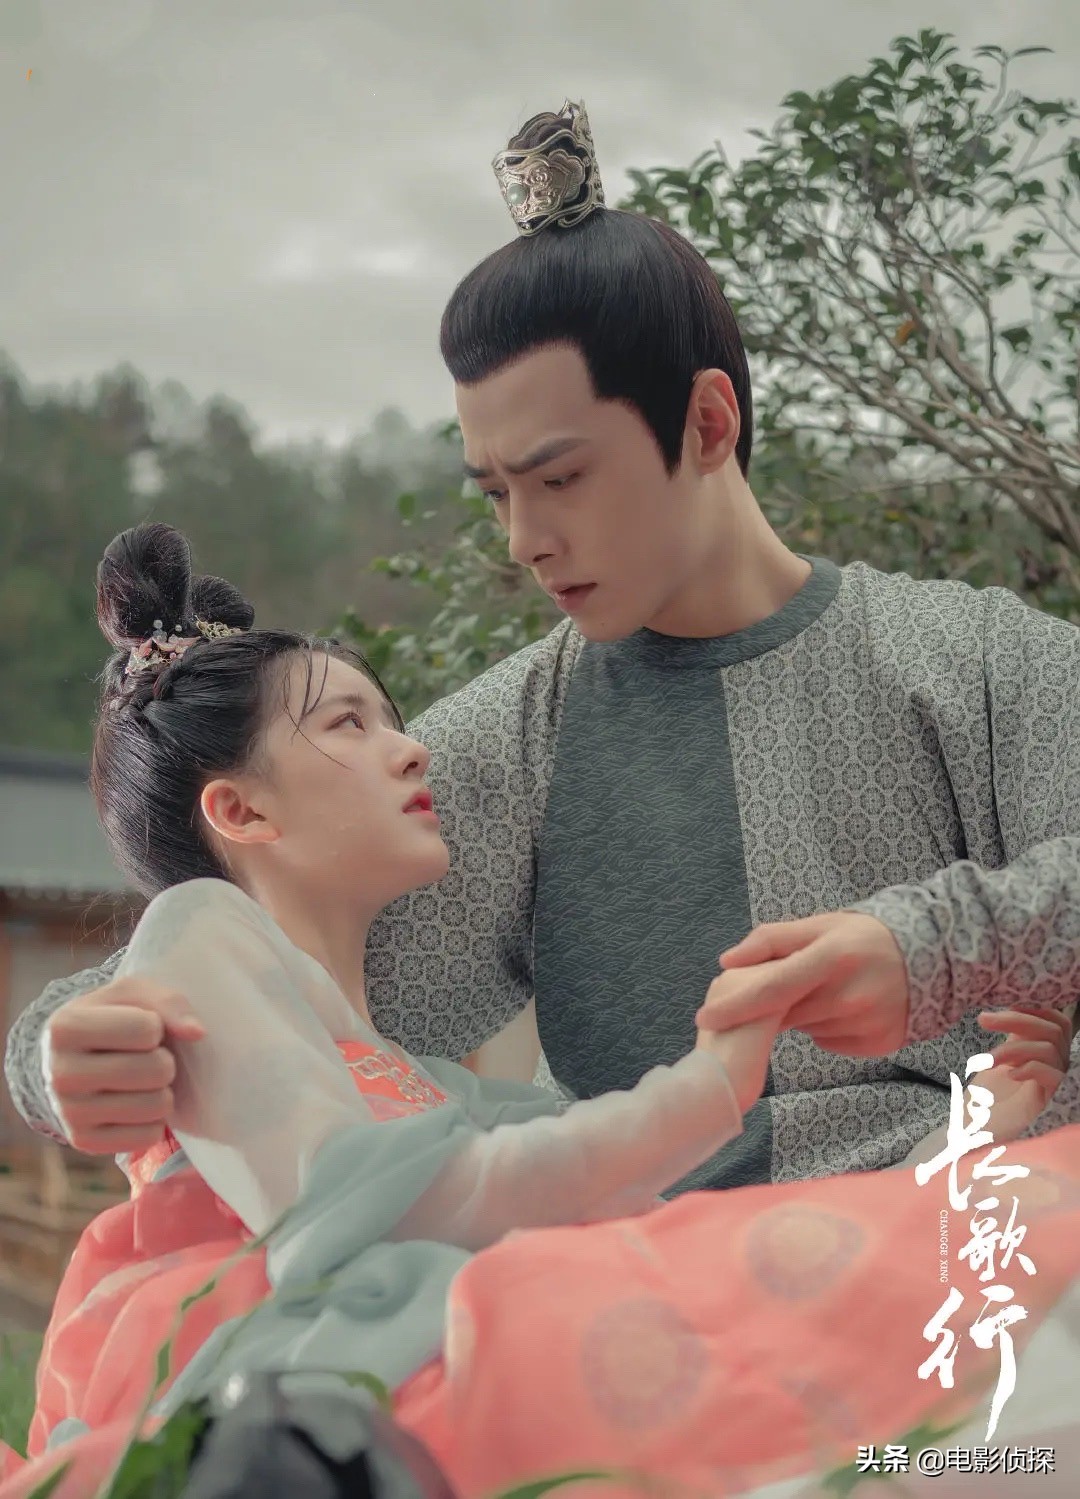 " long song goes " : Bright 3 rescue Le Yan, hold in the arms so that beauty returns for the last time